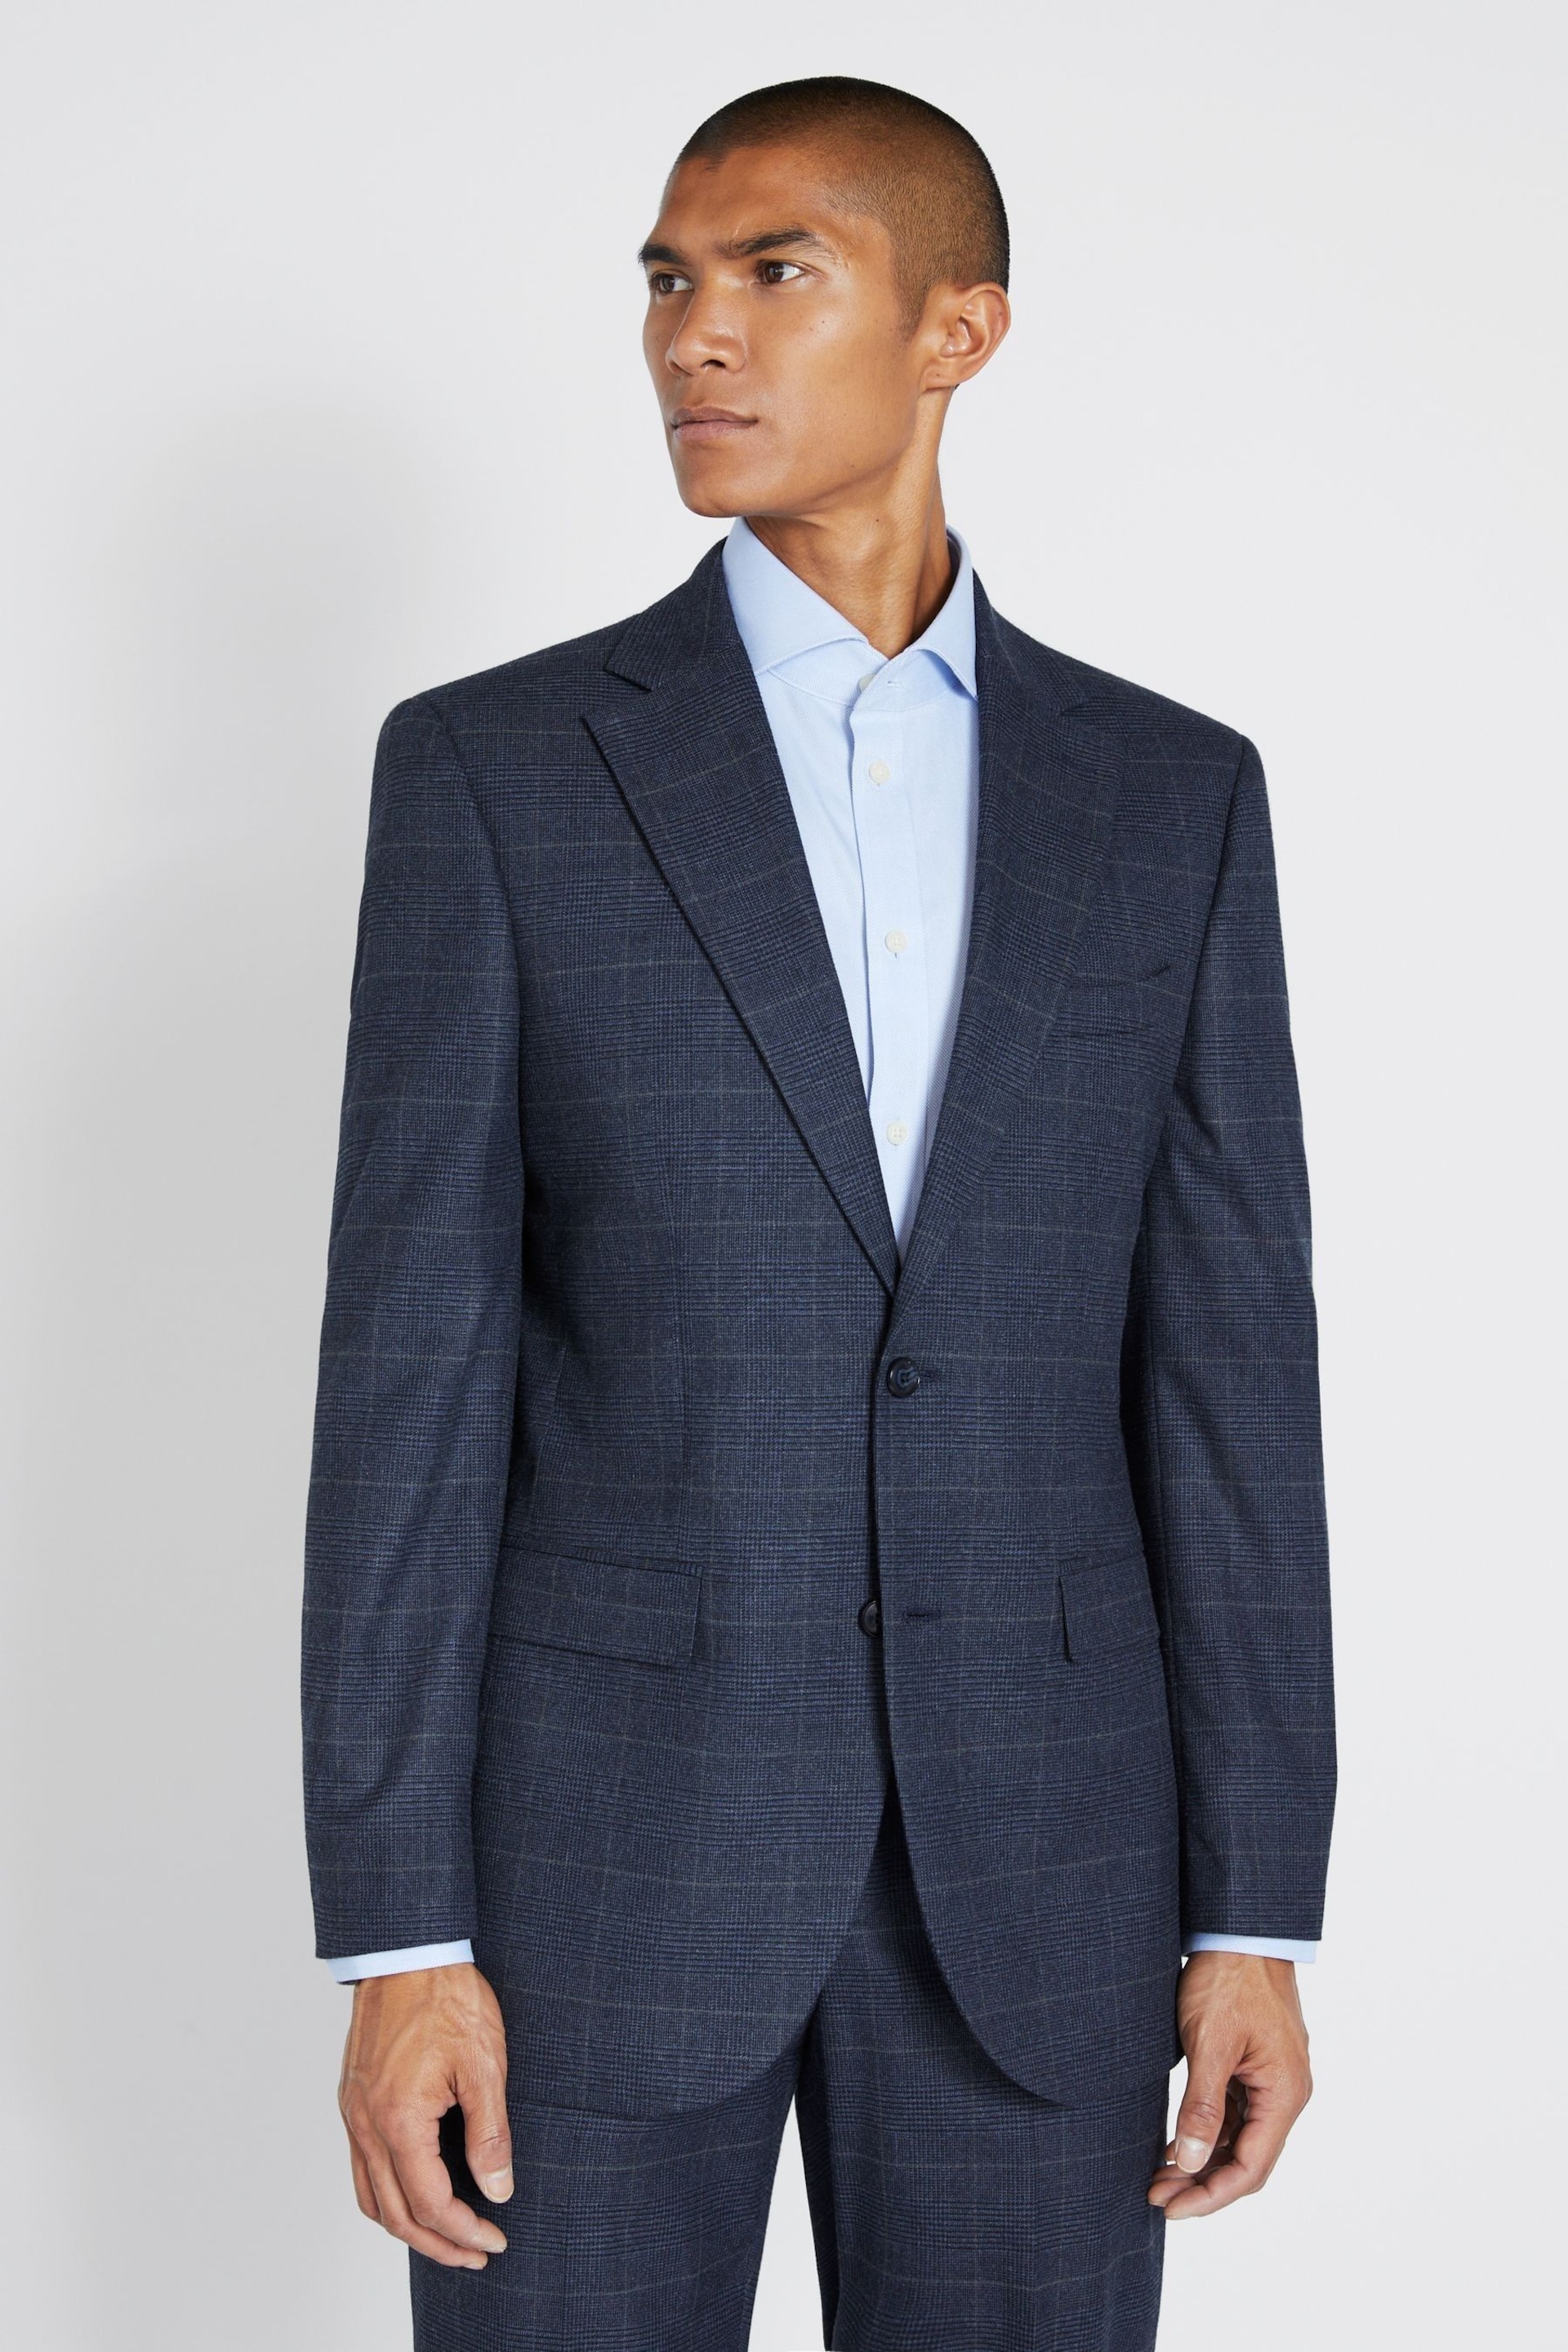 MOSS Regular Fit Blue With Khaki Check Suit: Jacket - Image 1 of 5